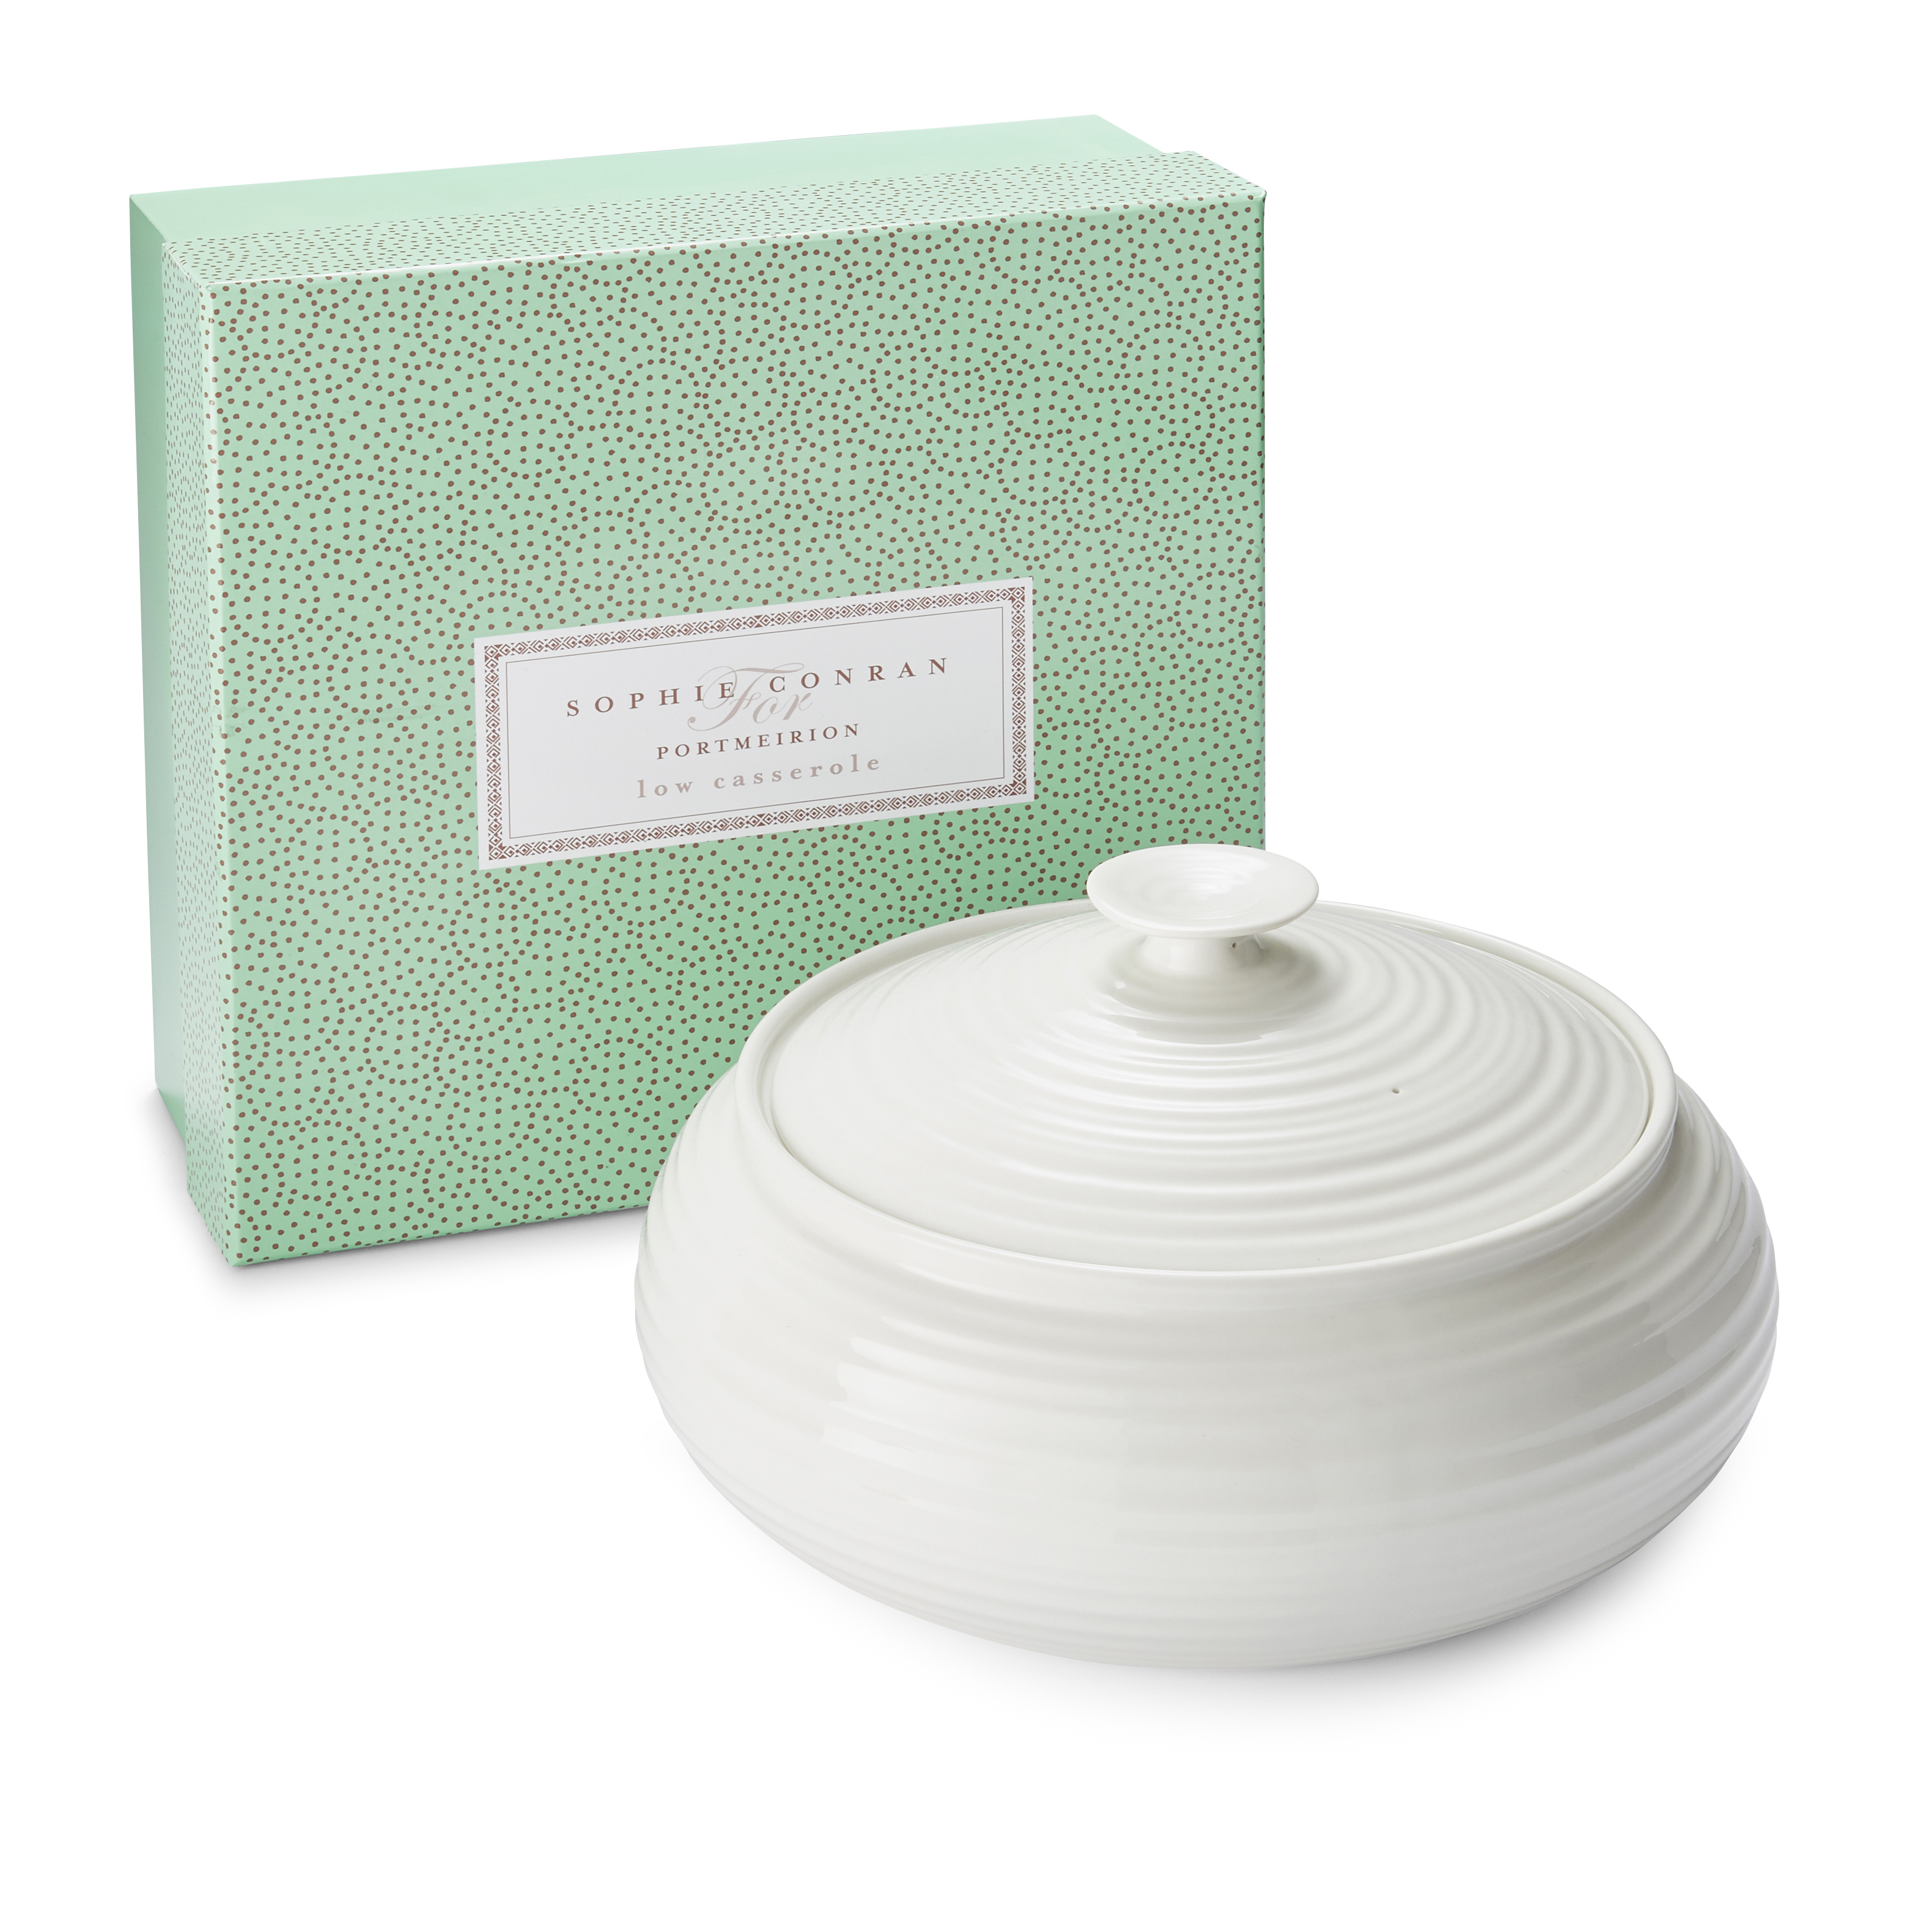 Sophie Conran for White Low Casserole 6 pint image number null